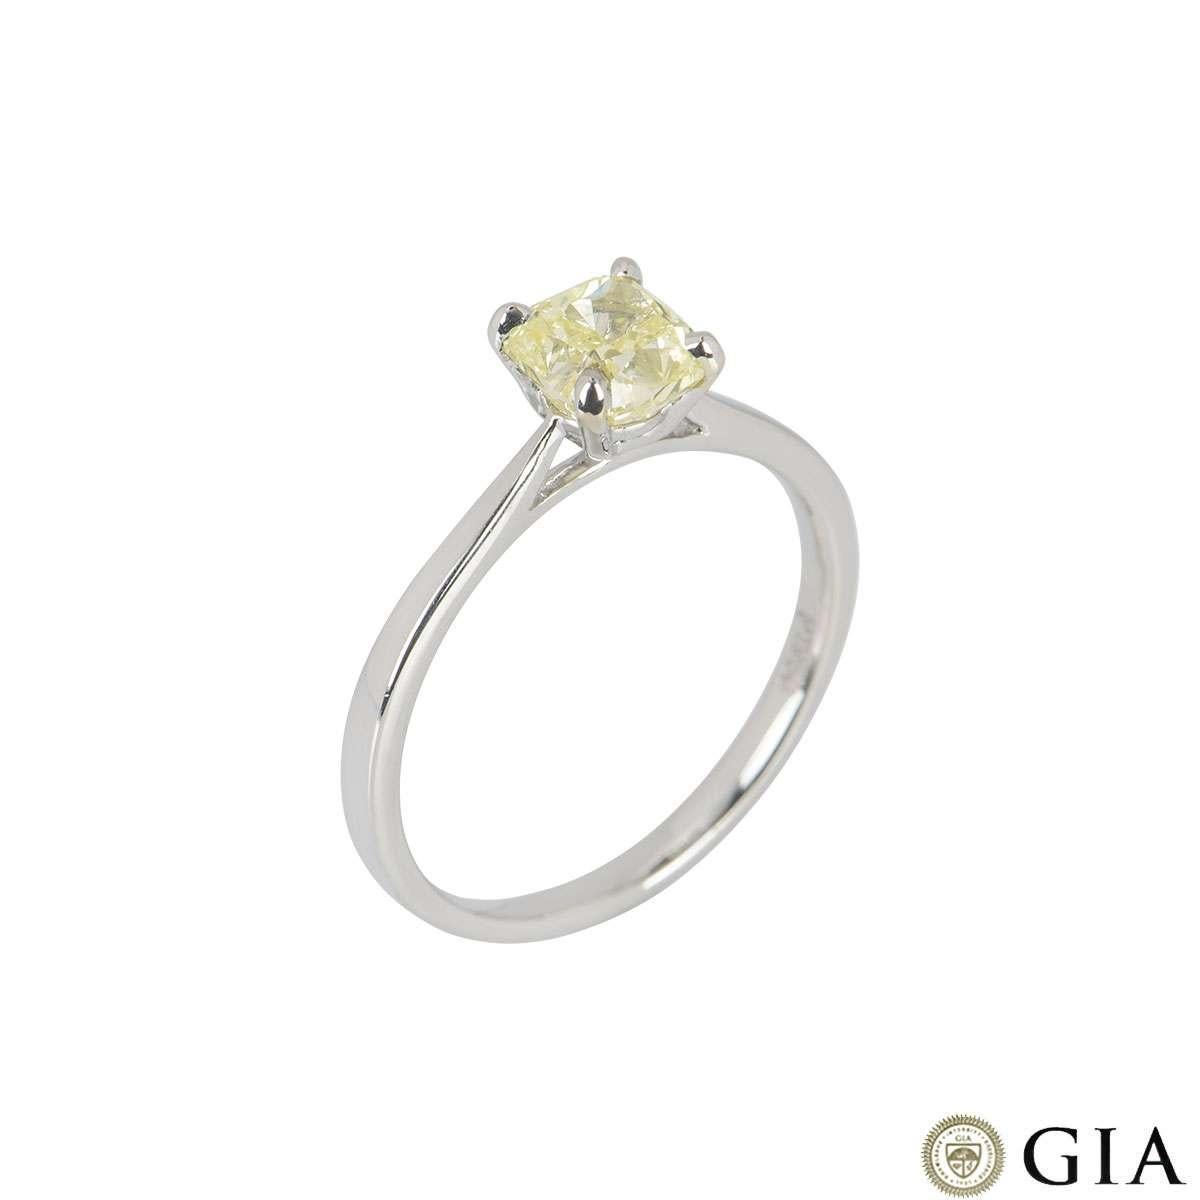 A platinum natural fancy yellow diamond ring. The ring features a cushion cut diamond set to centre in a four claw setting. The diamond has a weight of 1.03ct with a fancy yellow colour with even distribution. The ring is currently a size UK M½, EU